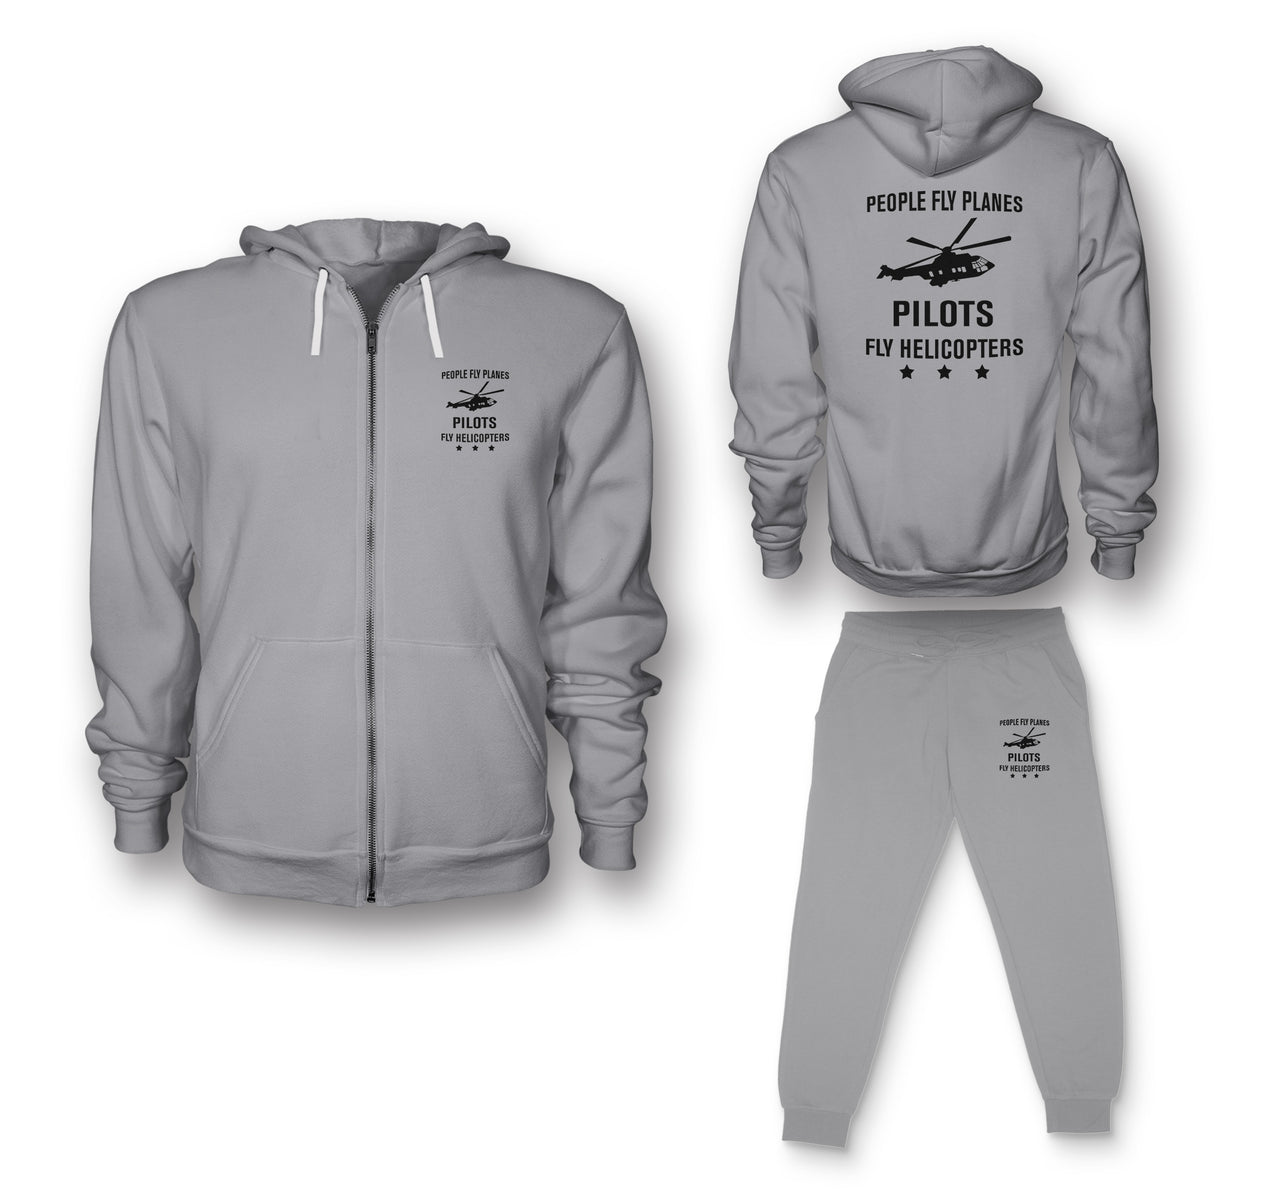 People Fly Planes Pilots Fly Helicopters Designed Zipped Hoodies & Sweatpants Set